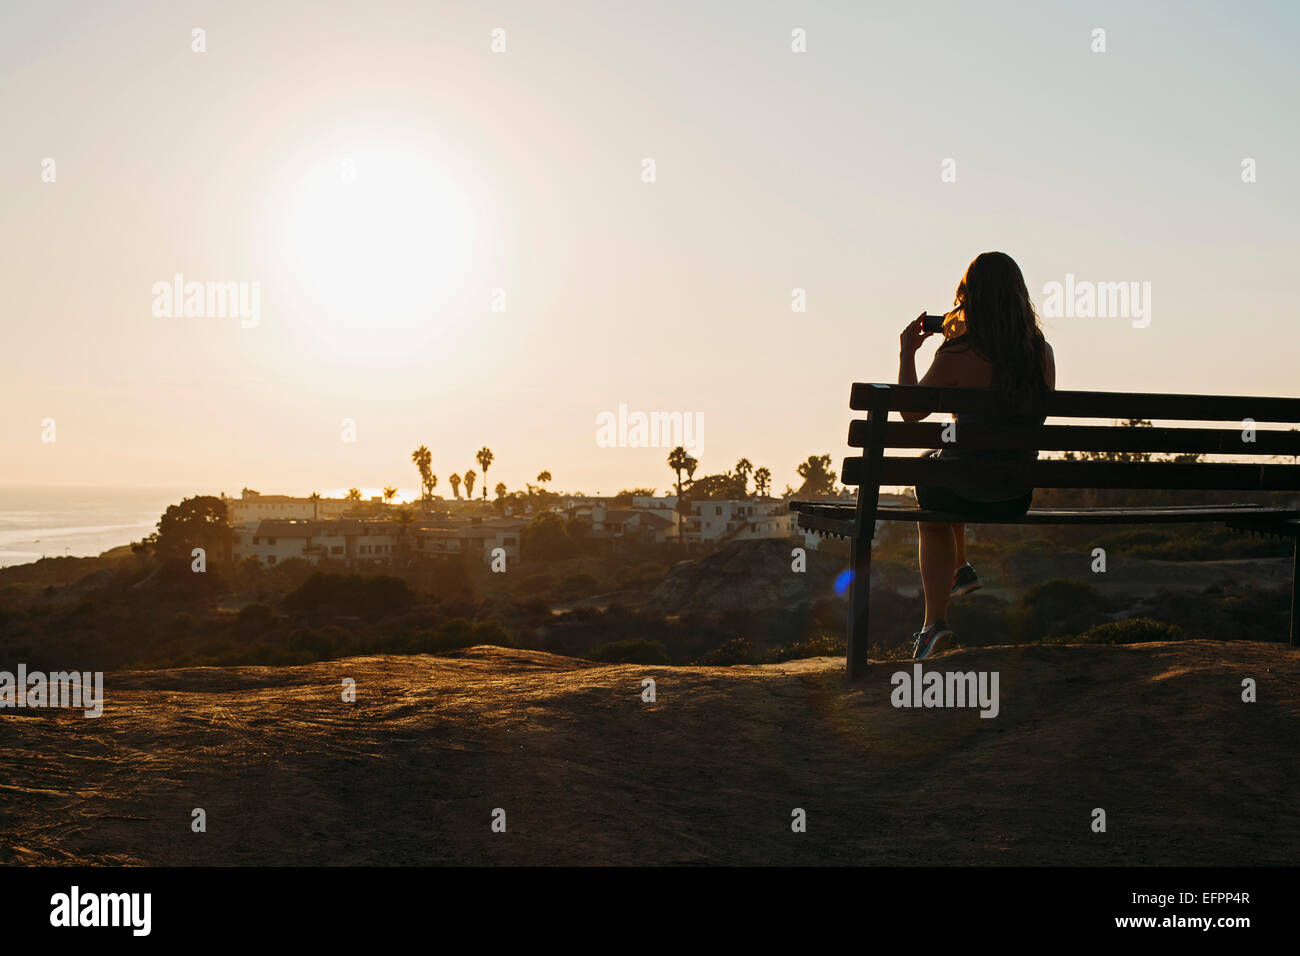 Silhouette of young woman sitting on clifftop bench photographing view on smartphone, San Clemente, California, USA Stock Photo